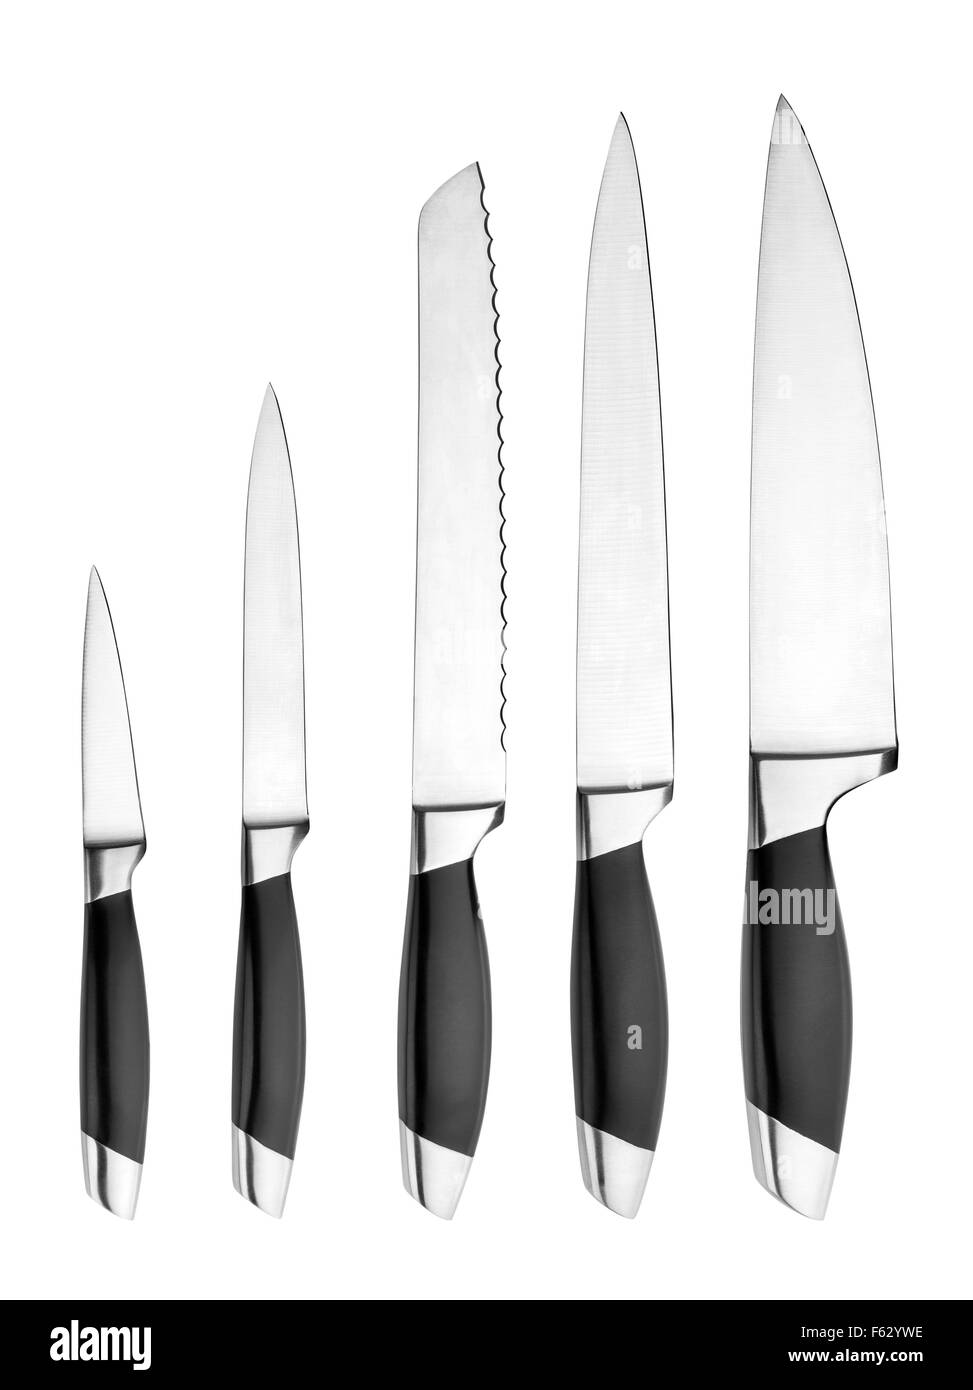 Set of professional kitchen knives isolated on white Stock Photo